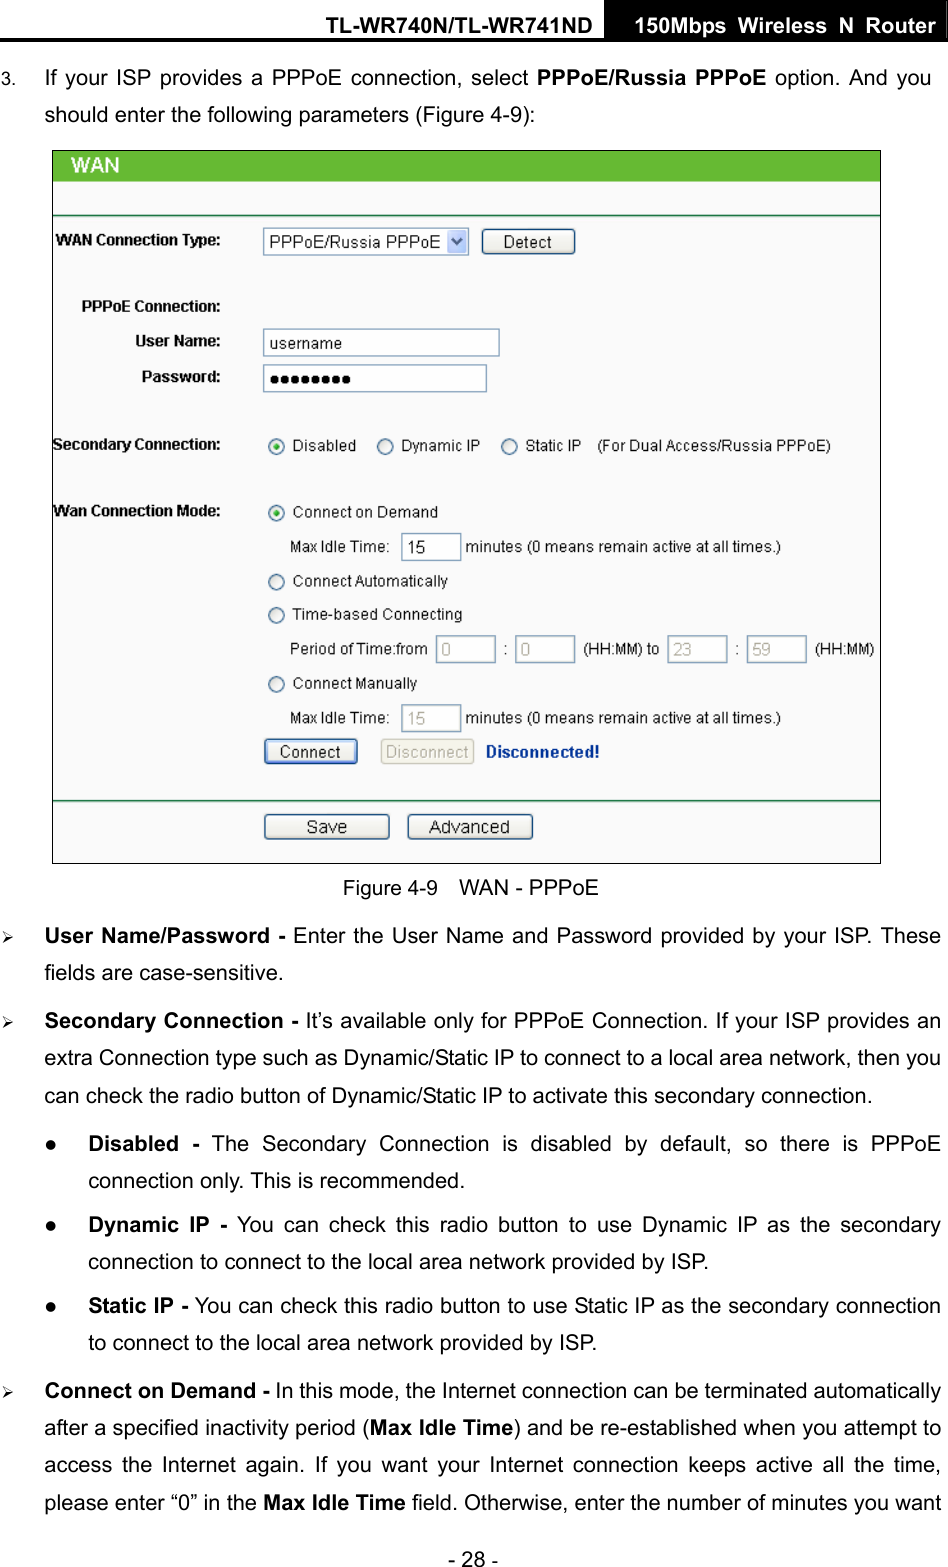 TL-WR740N/TL-WR741ND 150Mbps Wireless N Router - 28 - 3.  If your ISP provides a PPPoE connection, select PPPoE/Russia PPPoE option. And you should enter the following parameters (Figure 4-9):  Figure 4-9    WAN - PPPoE ¾ User Name/Password - Enter the User Name and Password provided by your ISP. These fields are case-sensitive. ¾ Secondary Connection - It’s available only for PPPoE Connection. If your ISP provides an extra Connection type such as Dynamic/Static IP to connect to a local area network, then you can check the radio button of Dynamic/Static IP to activate this secondary connection. z Disabled - The Secondary Connection is disabled by default, so there is PPPoE connection only. This is recommended. z Dynamic IP -  You can check this radio button to use Dynamic IP as the secondary connection to connect to the local area network provided by ISP. z Static IP - You can check this radio button to use Static IP as the secondary connection to connect to the local area network provided by ISP. ¾ Connect on Demand - In this mode, the Internet connection can be terminated automatically after a specified inactivity period (Max Idle Time) and be re-established when you attempt to access the Internet again. If you want your Internet connection keeps active all the time, please enter “0” in the Max Idle Time field. Otherwise, enter the number of minutes you want 